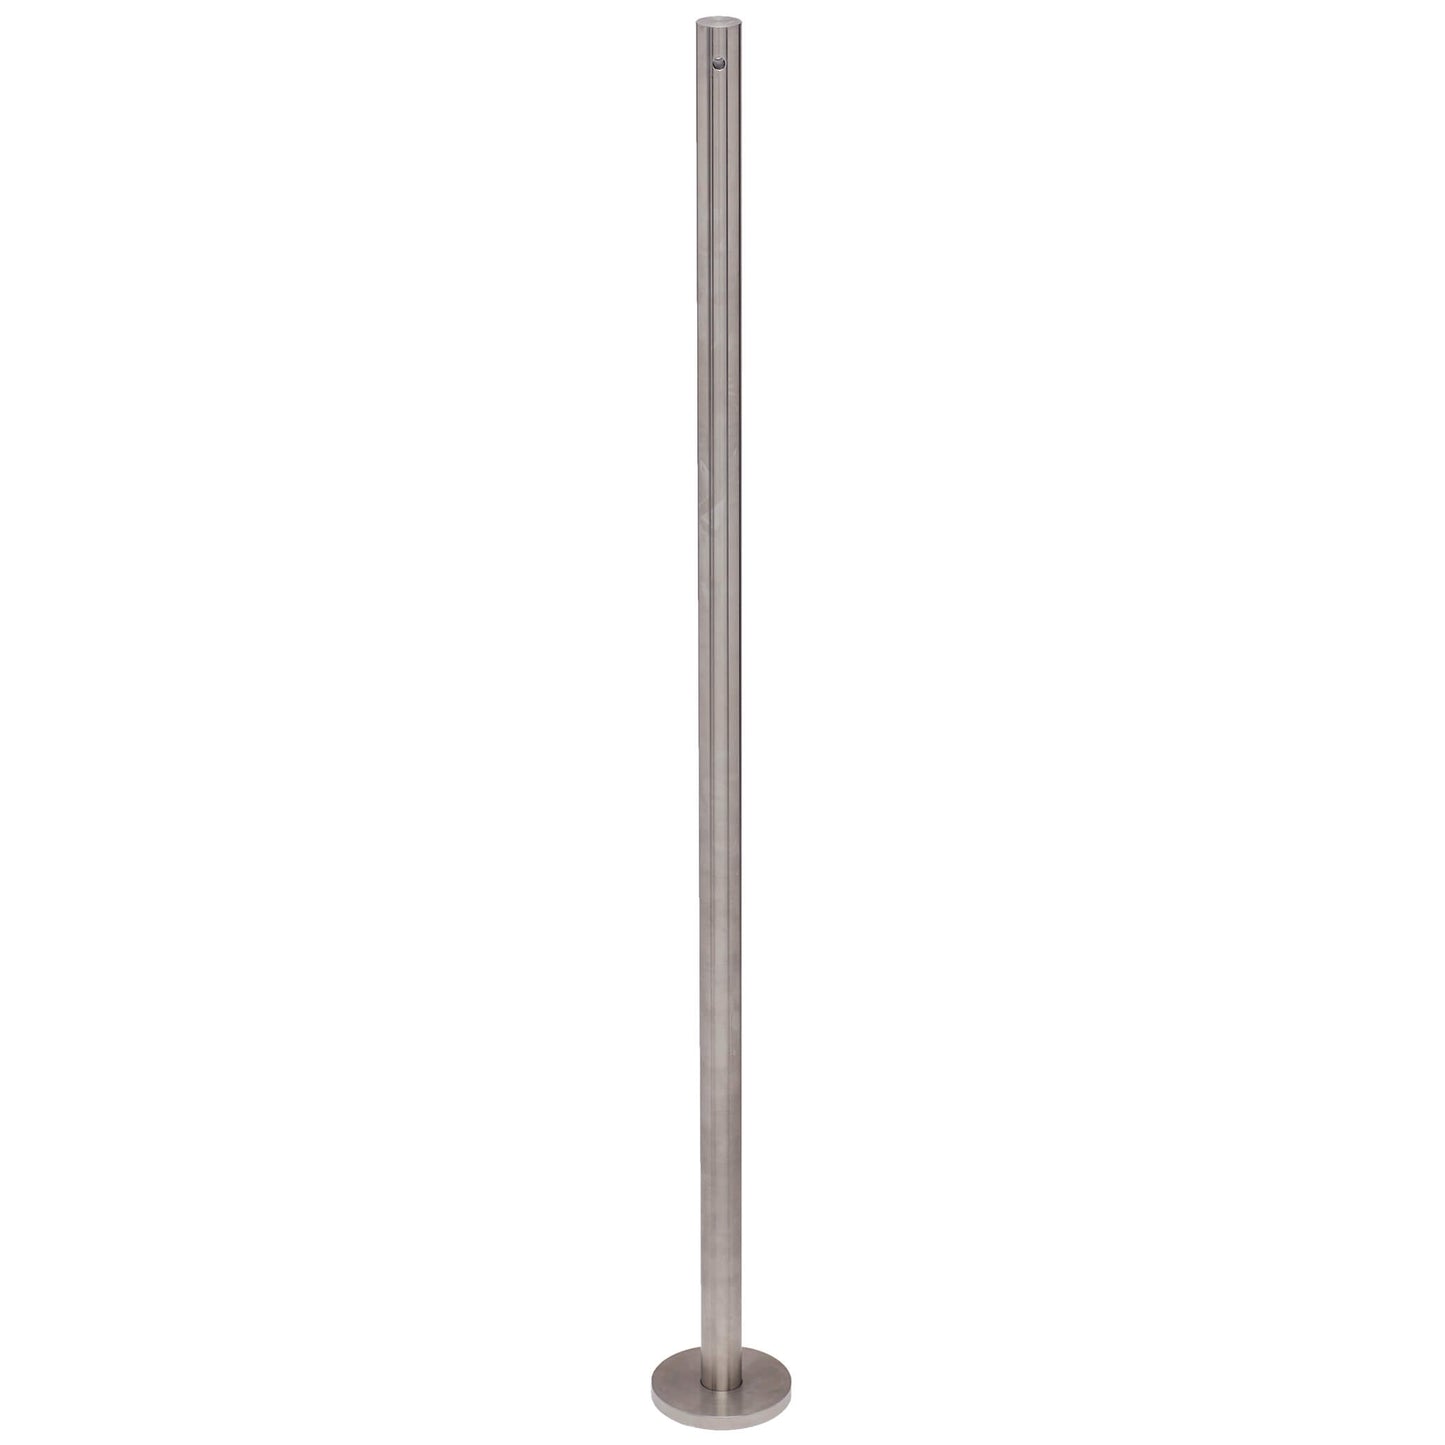 Medium Surface Mounted Stanchion - 751mm high